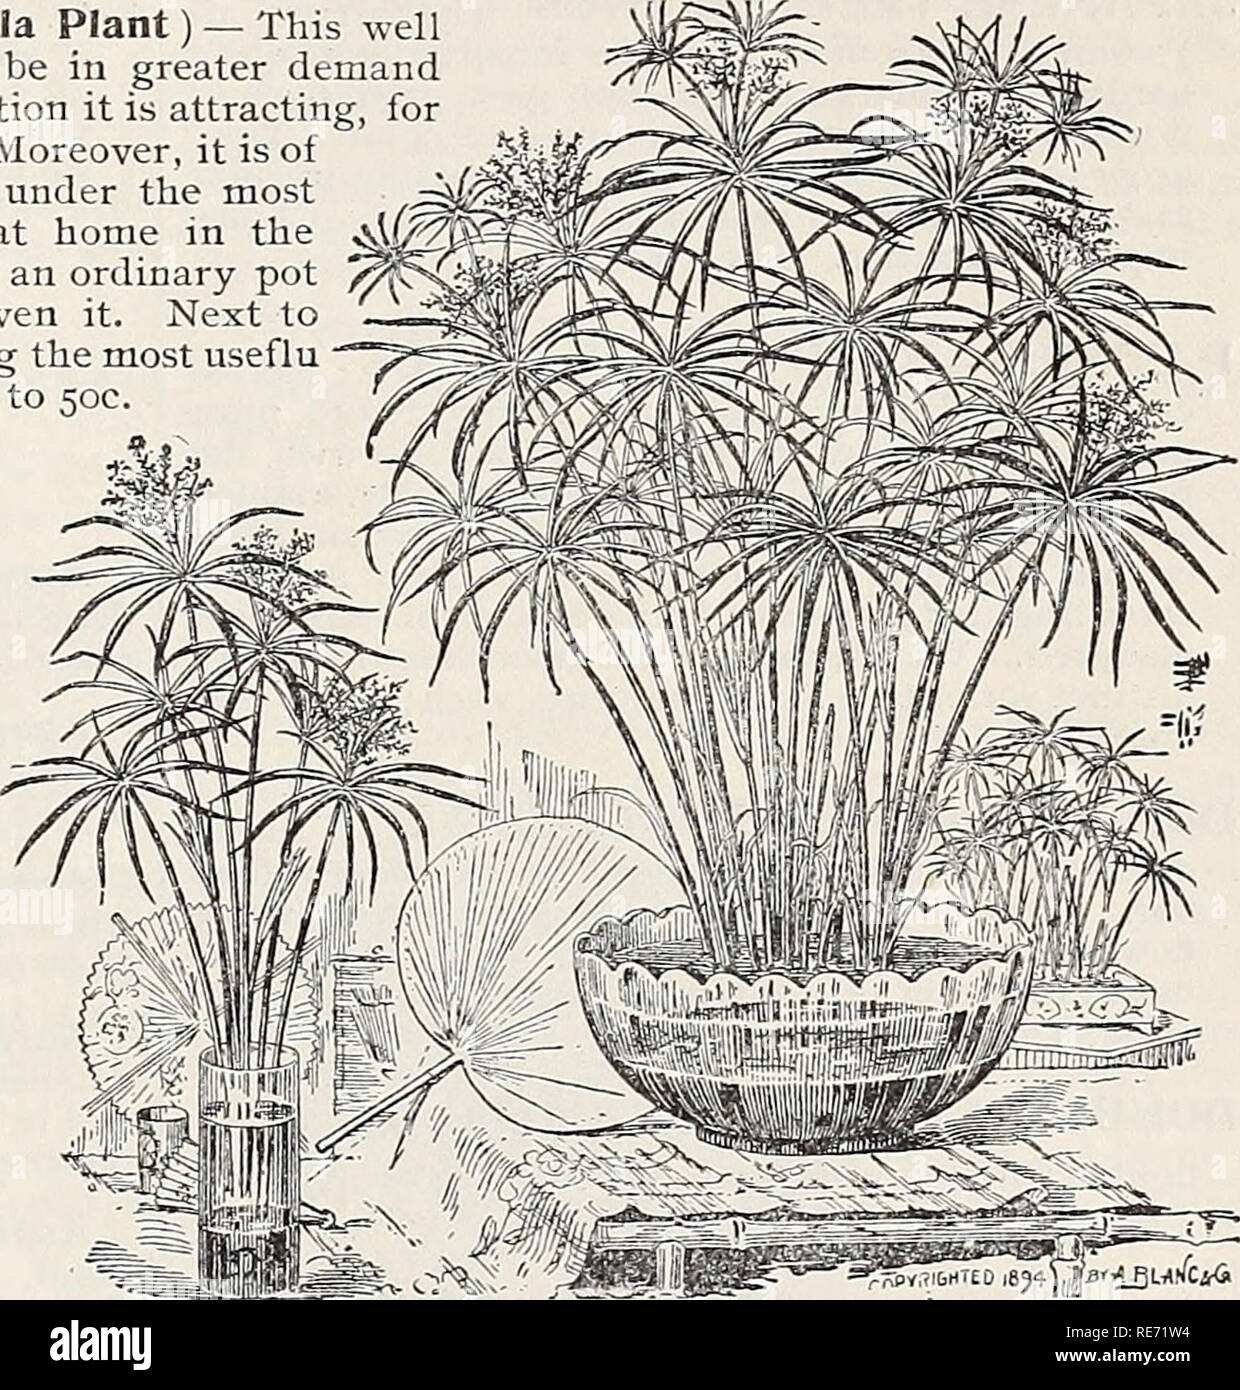 . Cox seed and plant co. catalogue. Seed industry and trade Catalogs; Seeds Catalogs; Flowers Seeds Catalogs; Fruit Seeds Catalogs; Plants, Ornamental Catalogs; Trees Catalogs. CYPERUS ALTERNIFOUUS (Umbrella Plant)-This well known plant, always popular, seems now to be in greater demand than ever it was. It well deserves the attention it is attracting, for it is a pretty, unique and striking object. Moreover, it is of very easy culture, growing and thriving under the most positive neglect. Being an aquatic it is at home in the aquarium, but it succeeds equallj' as well as an ordinary pot plant Stock Photo